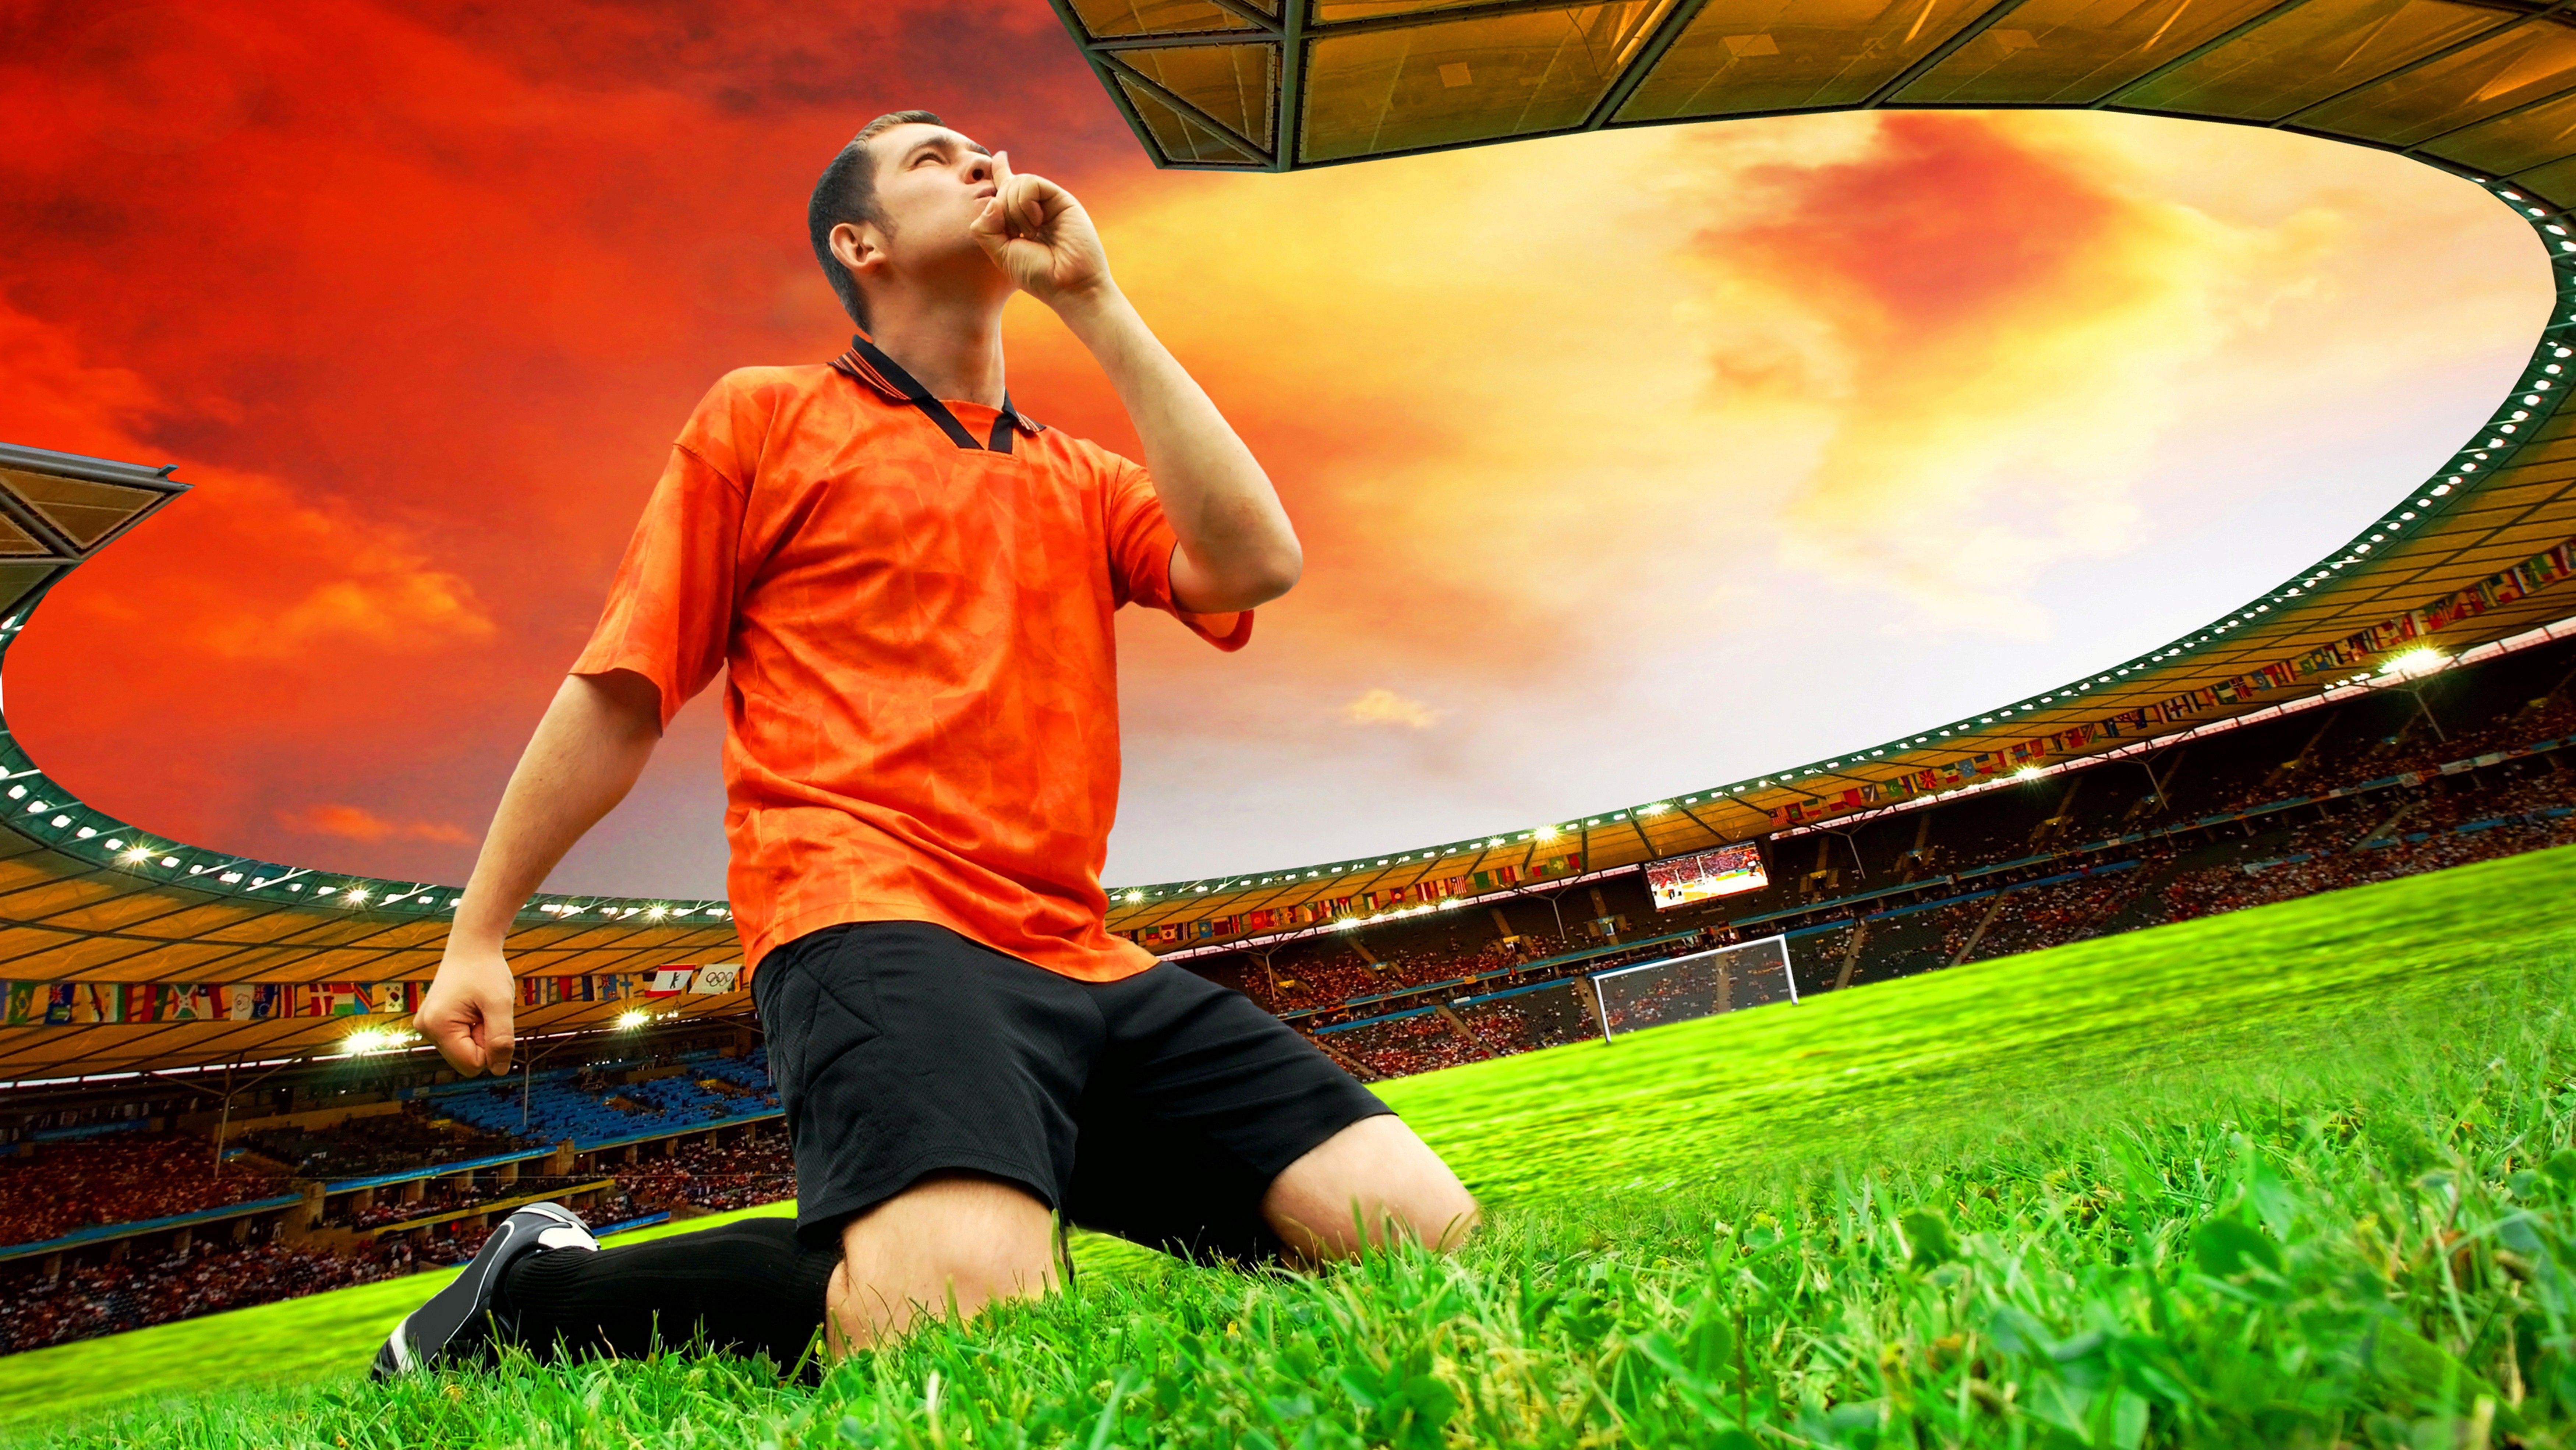 Amazing Football Player at Ground HD Pics HD Famous Backgrounds